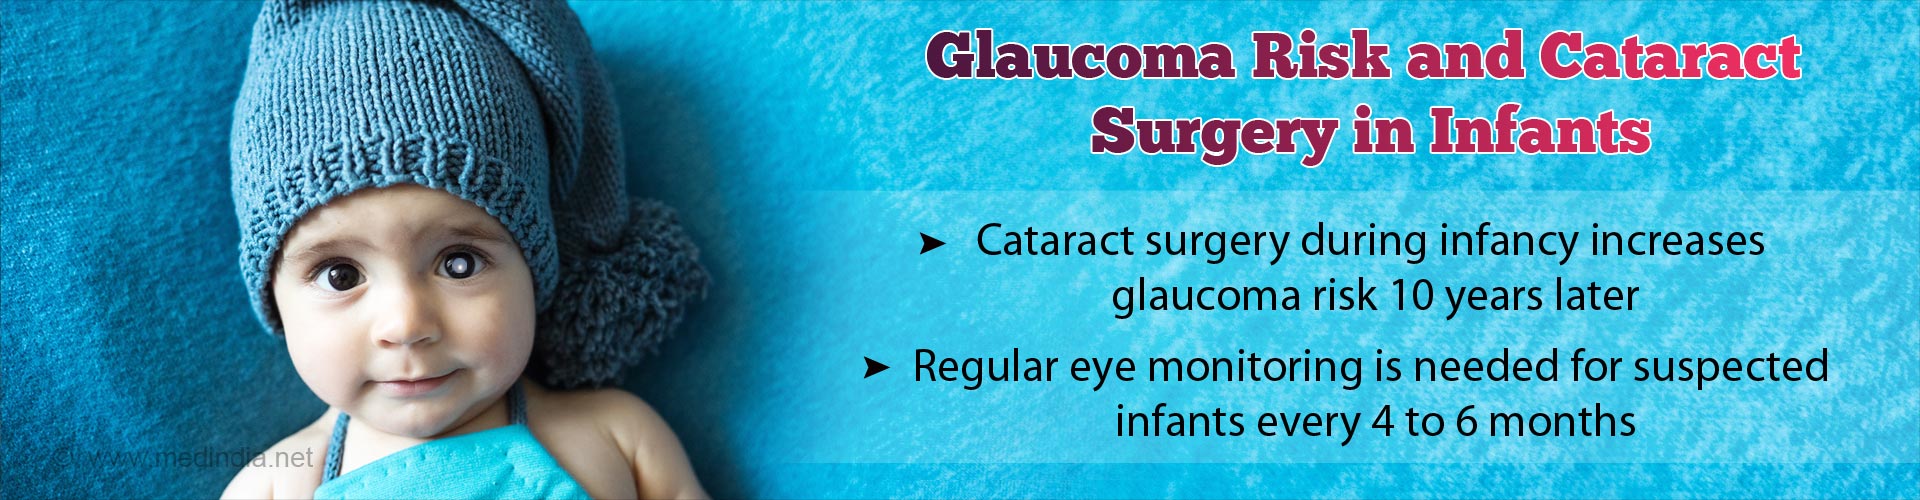 Cataract Surgery in Infants Might Increase Risk of Glaucoma